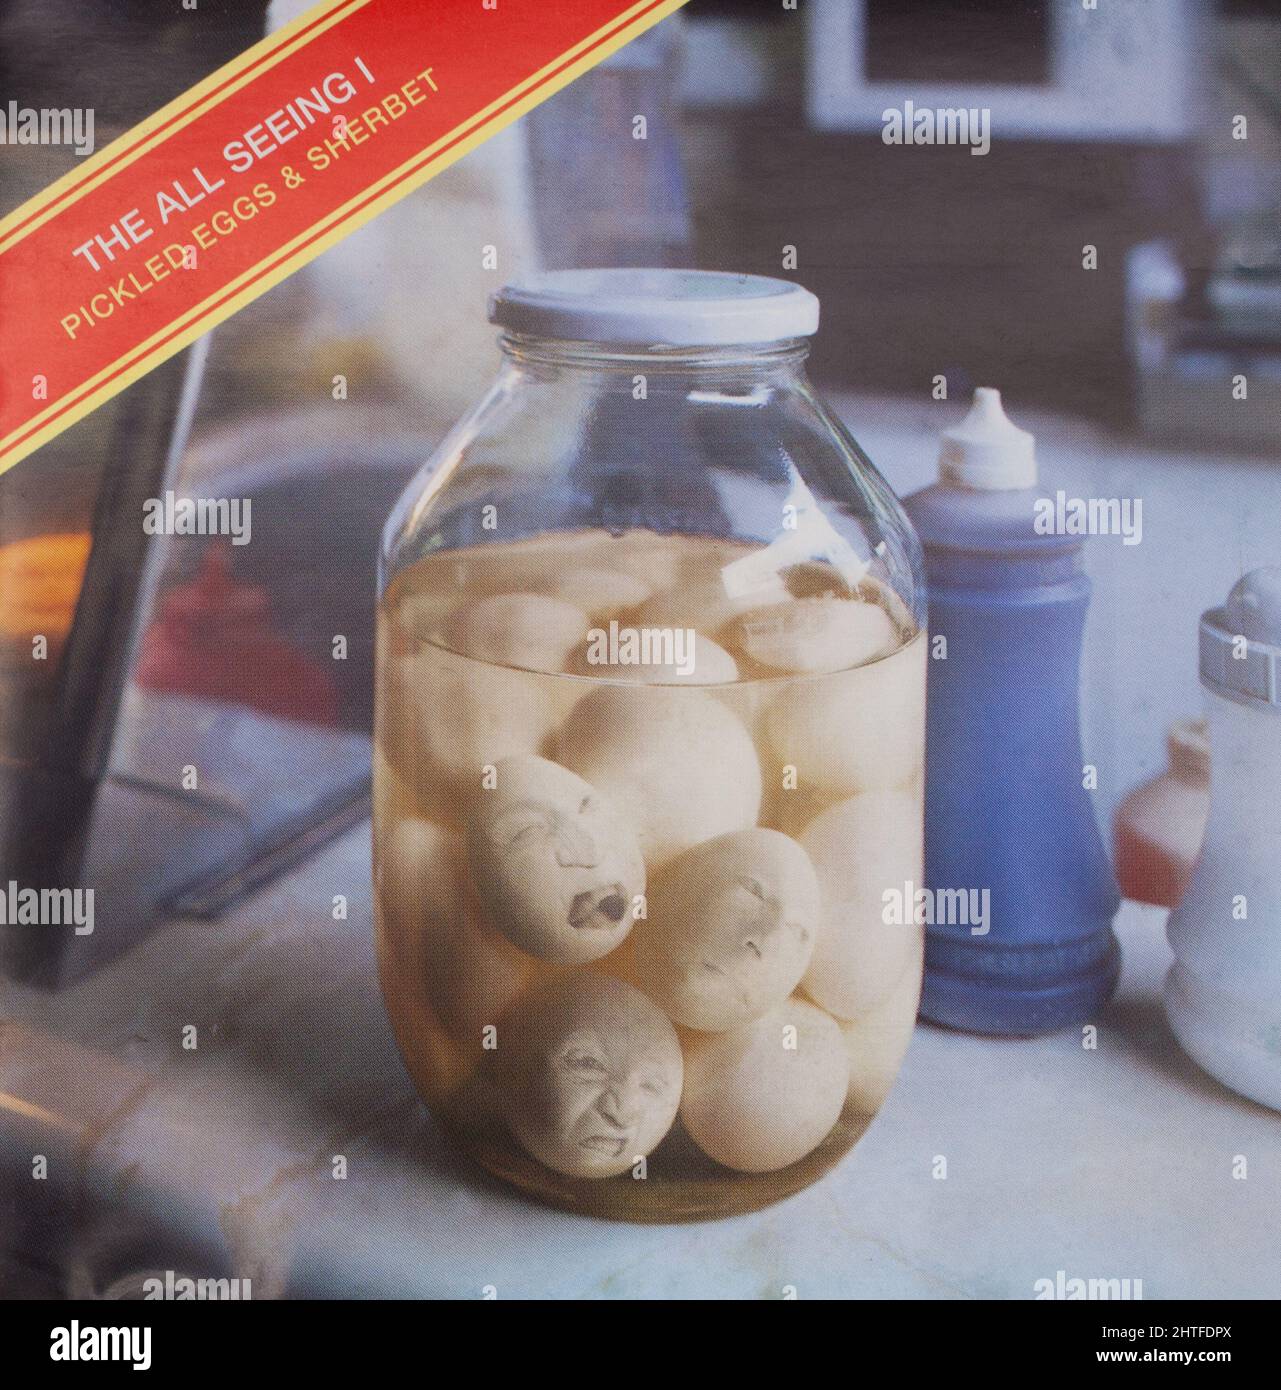 The CD album cover to Pickled Eggs and Sherbet by The All Seeing I Stock Photo